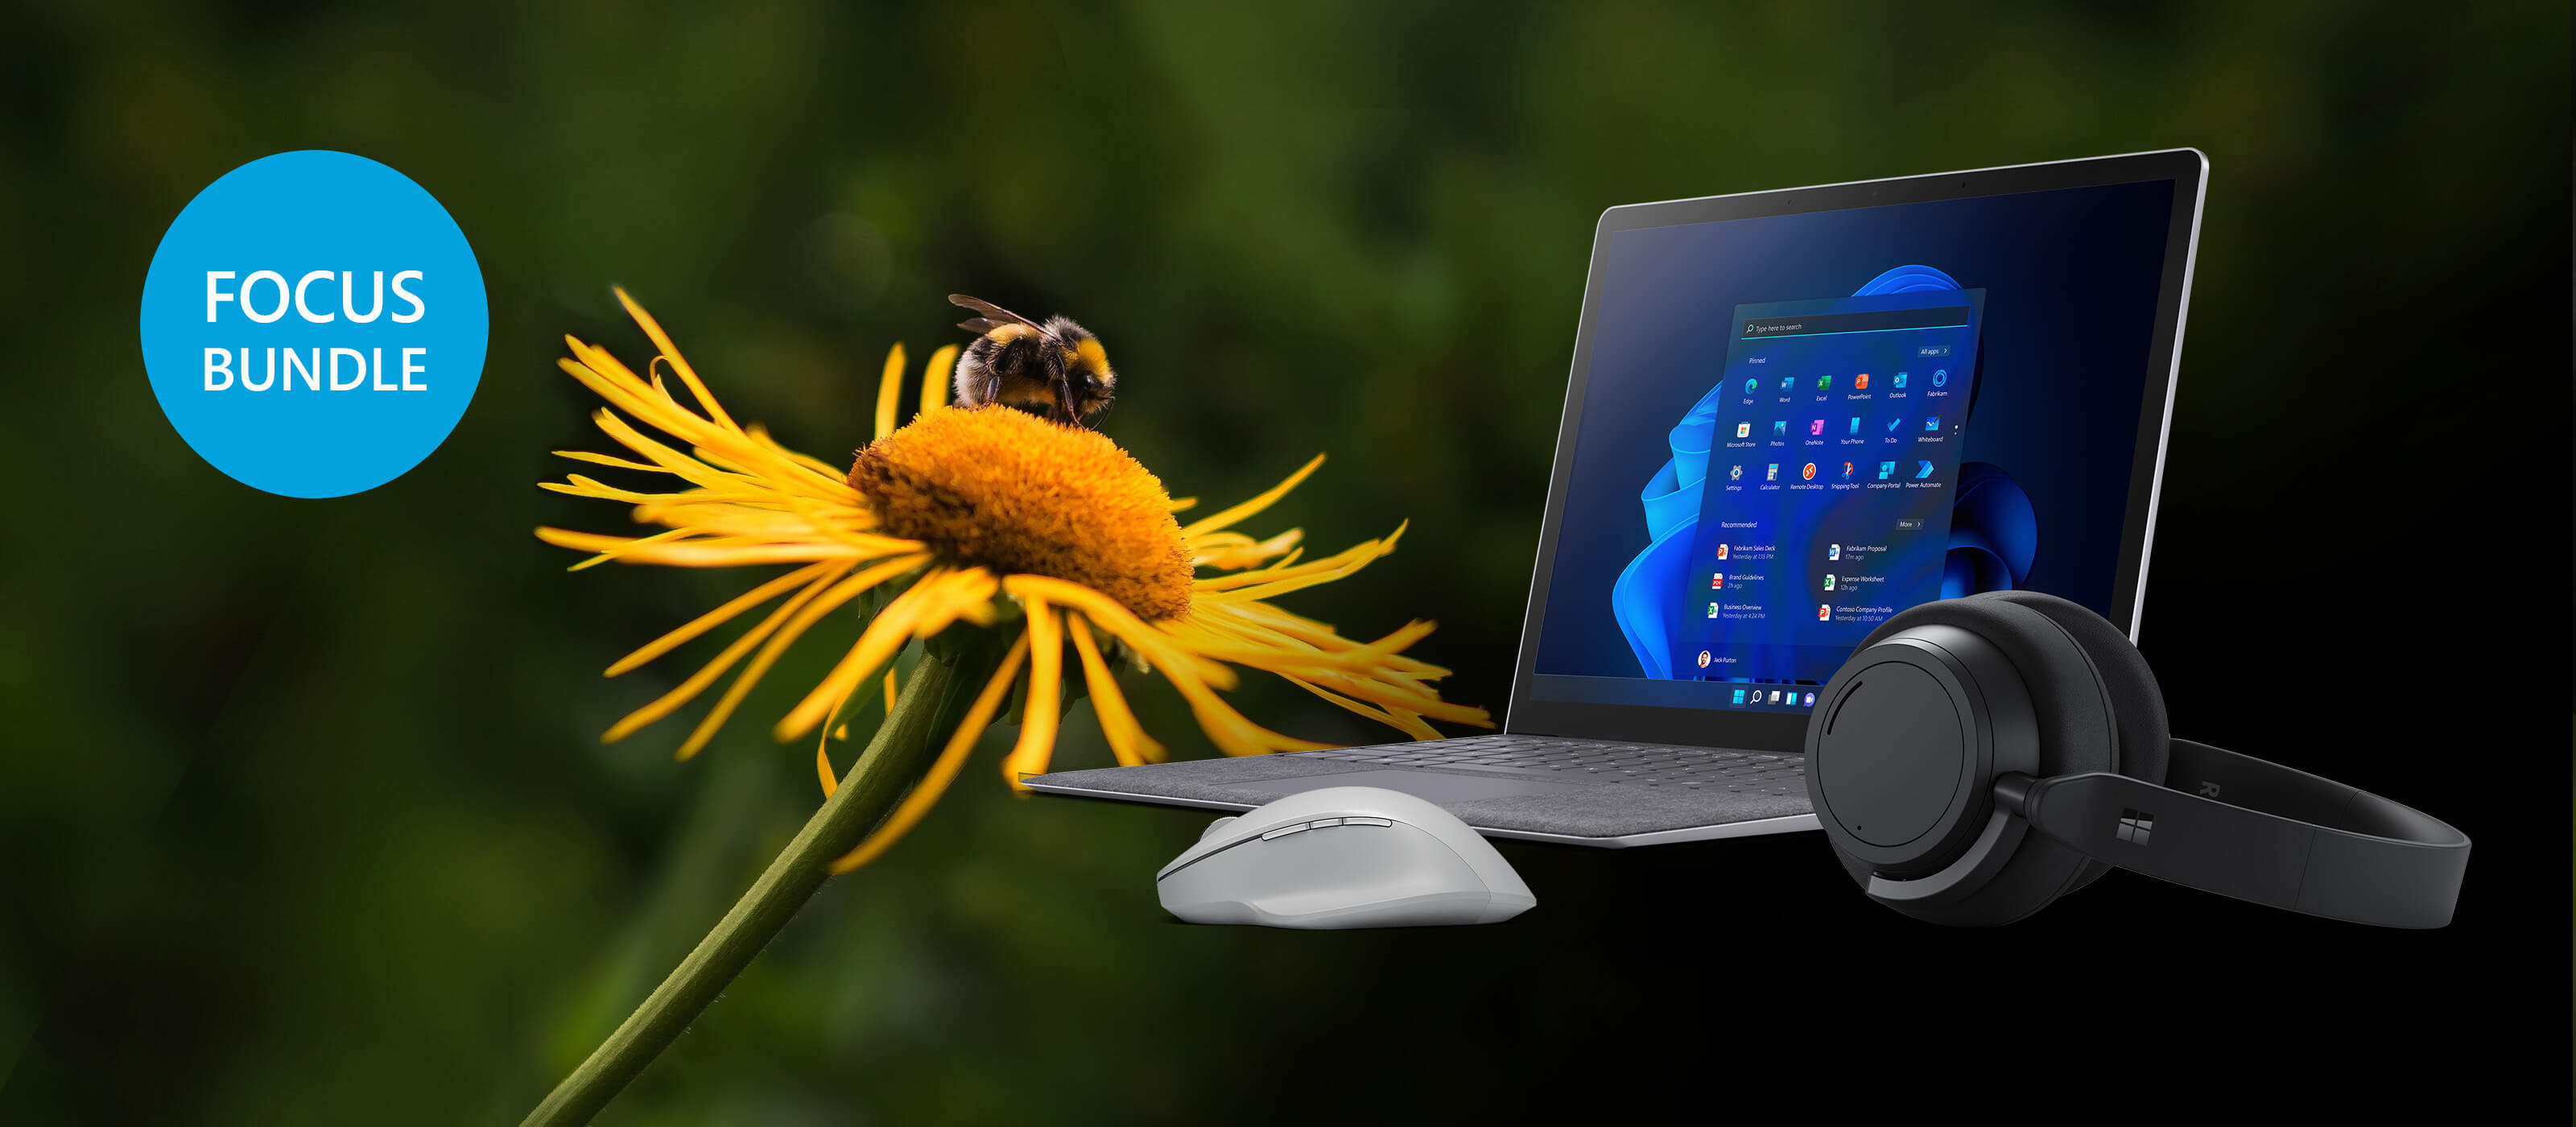 The Surface Laptop 4 is placed in front of a flower with a bumblebee on it